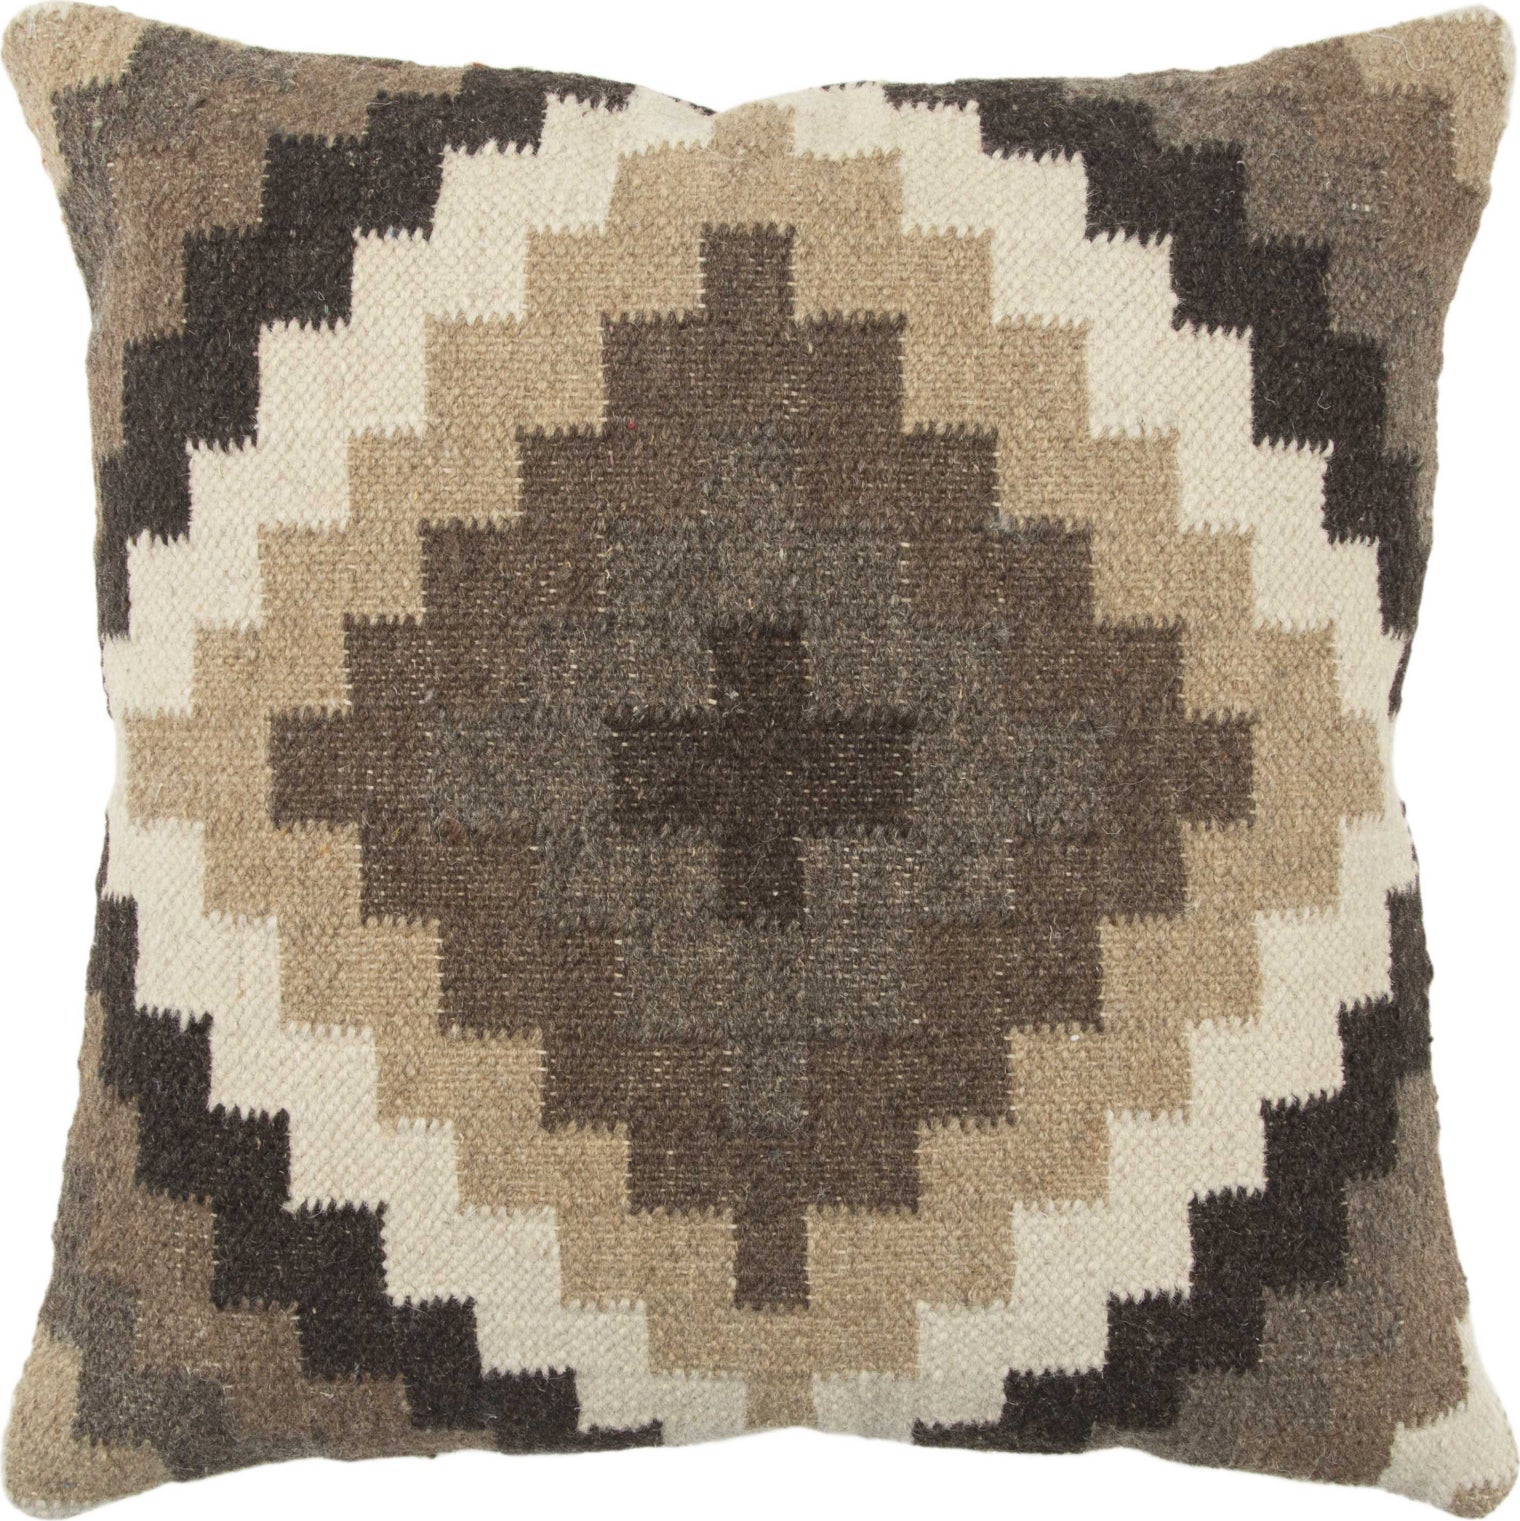 Rizzy Pillows T13910 Brown